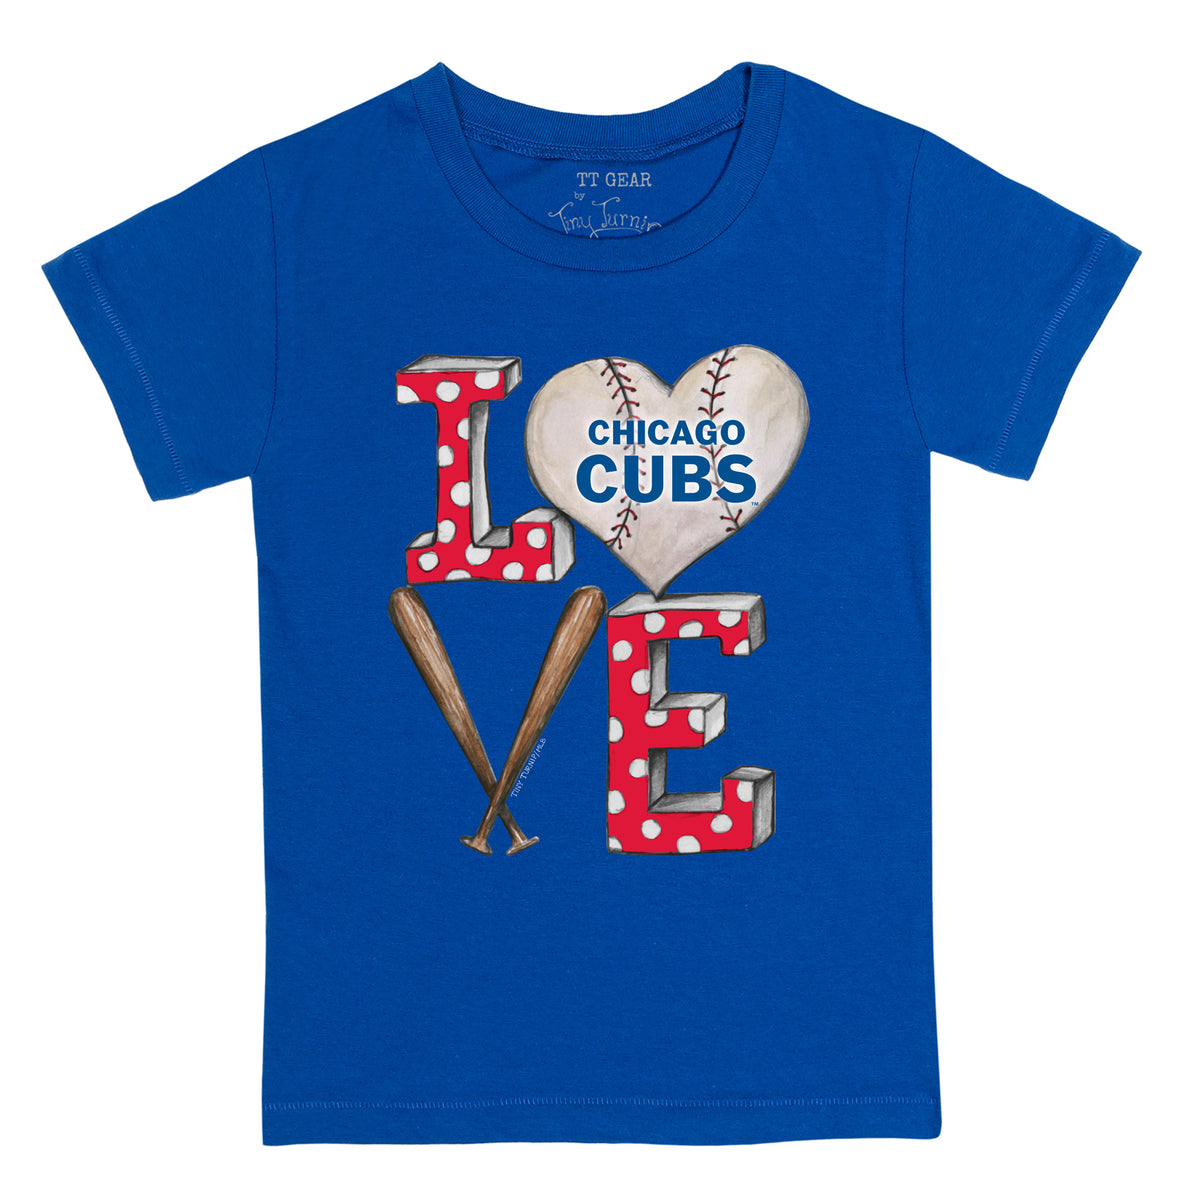 Just One Before Die Chicago Cubs T-Shirt